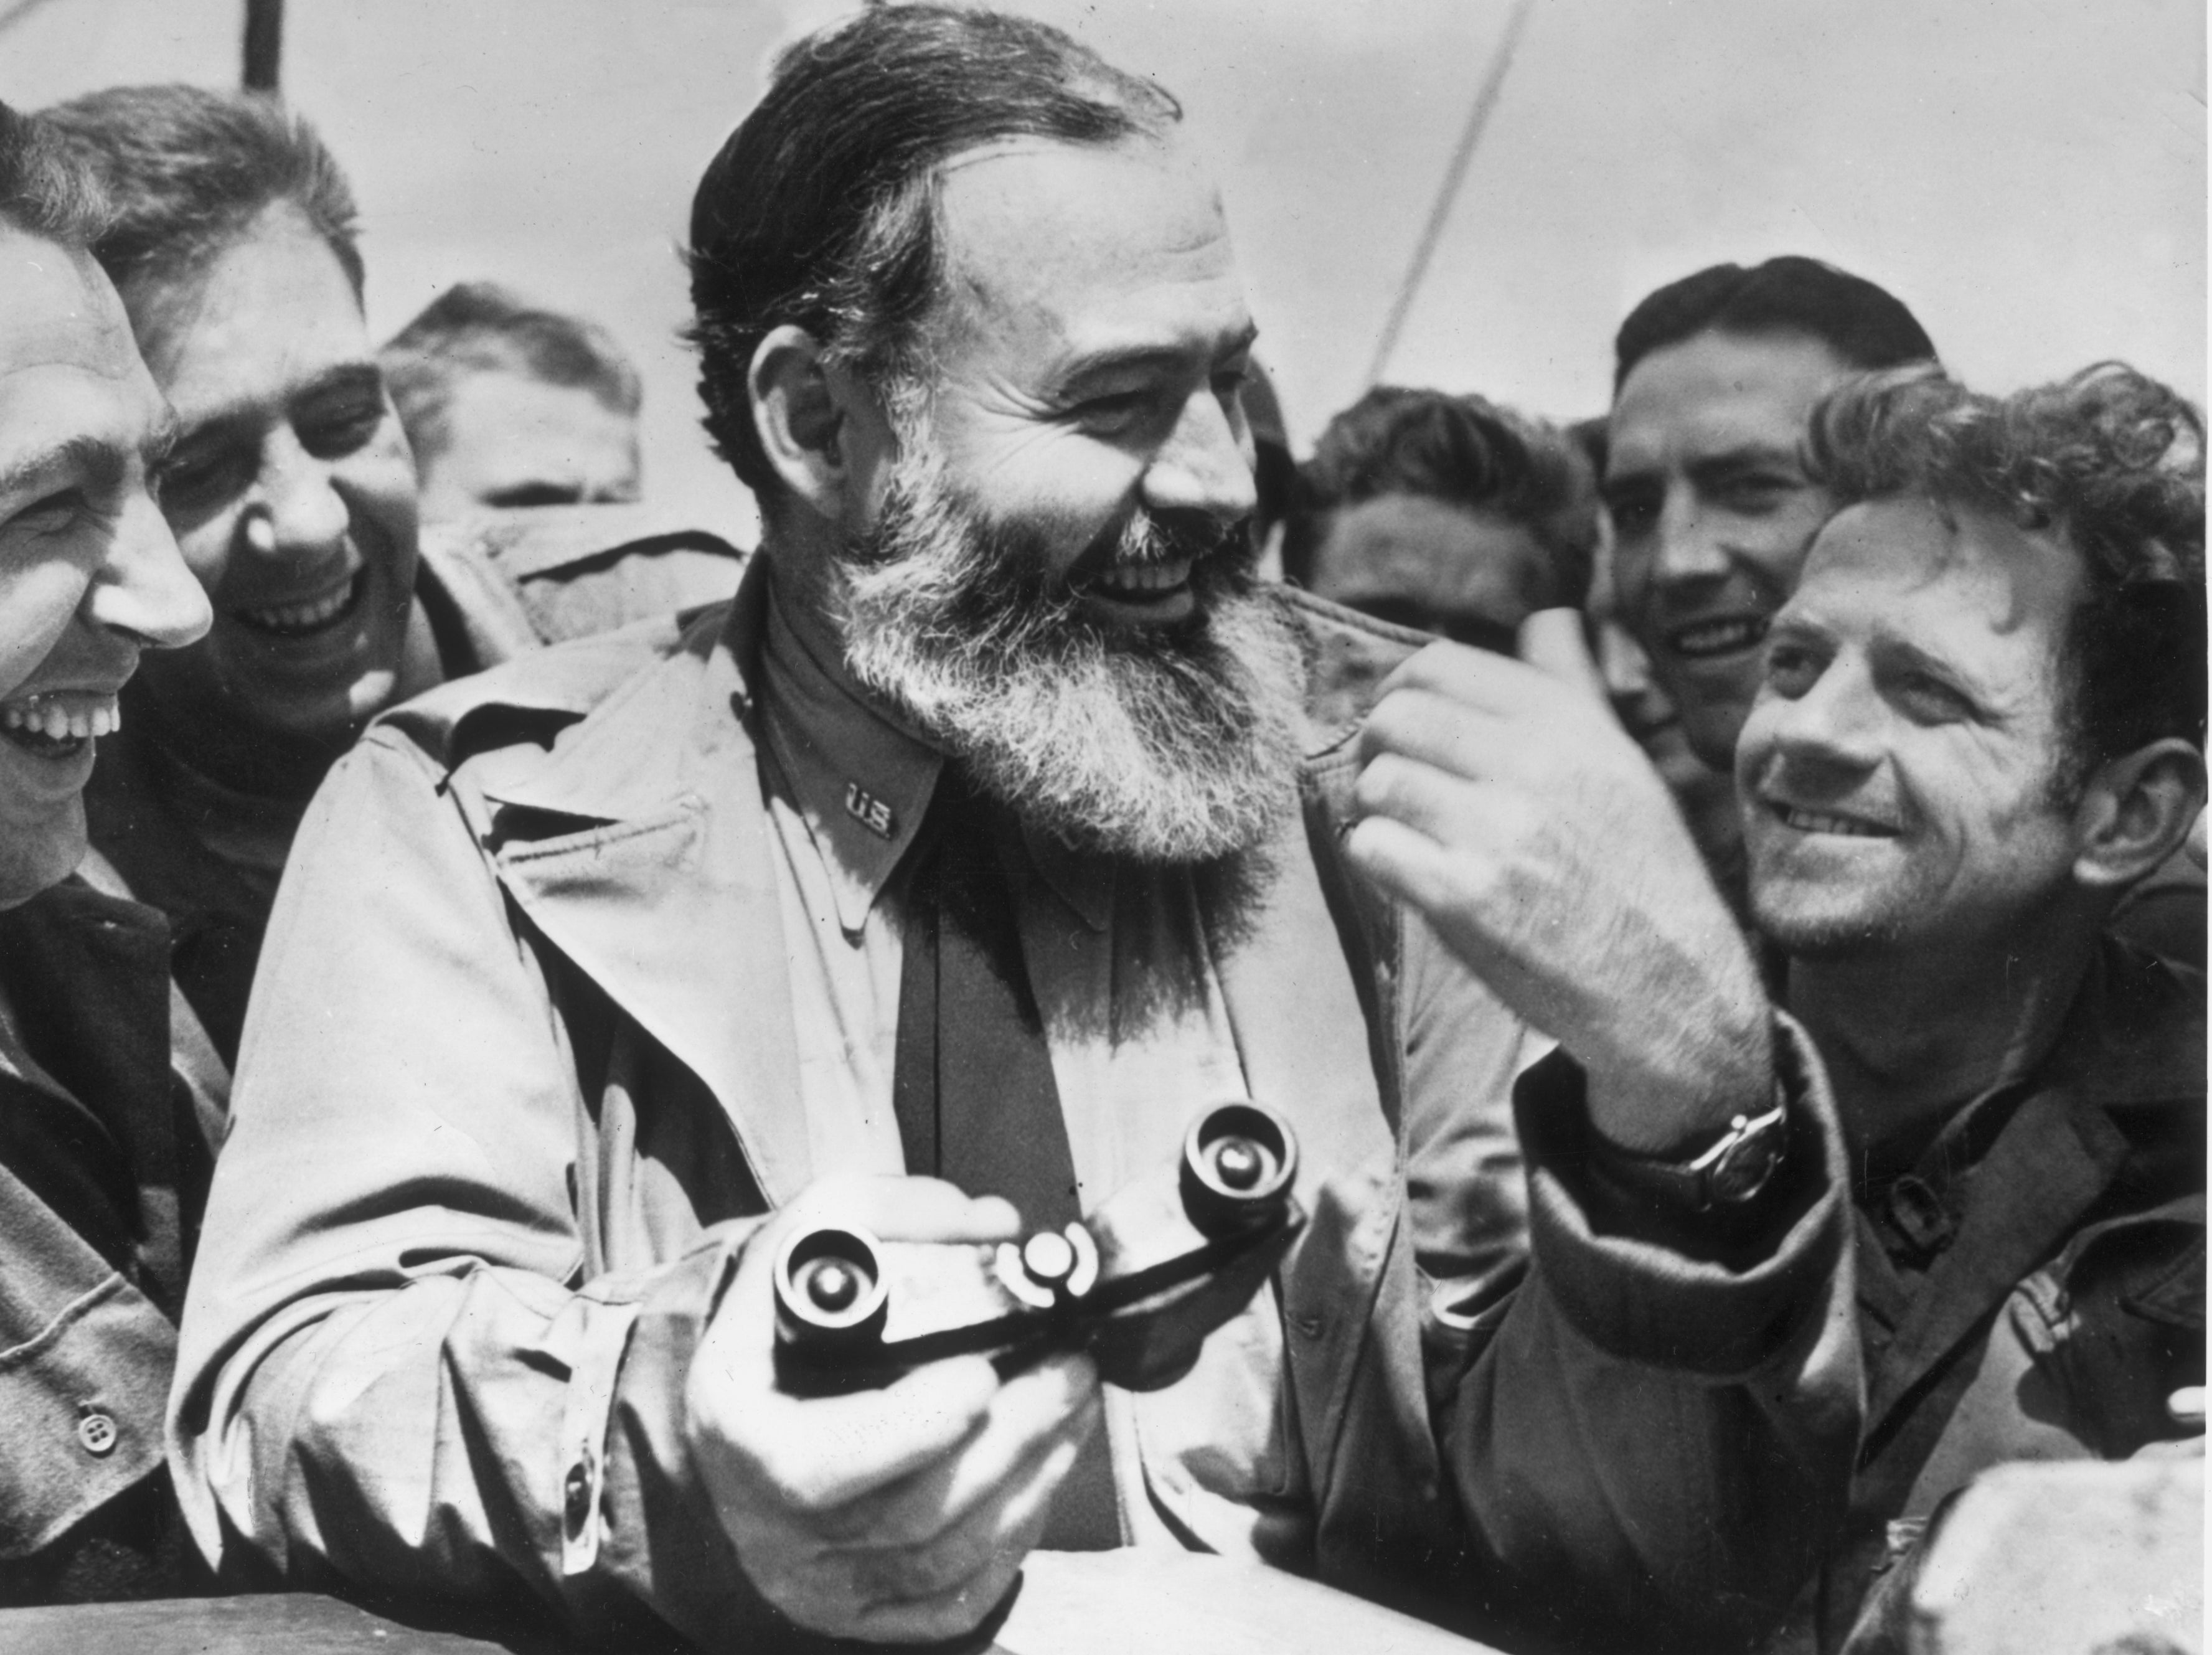 Ernest Hemingway, working as a war correspondent, travels with US soldiers on their way to Normandy for the D-Day landings